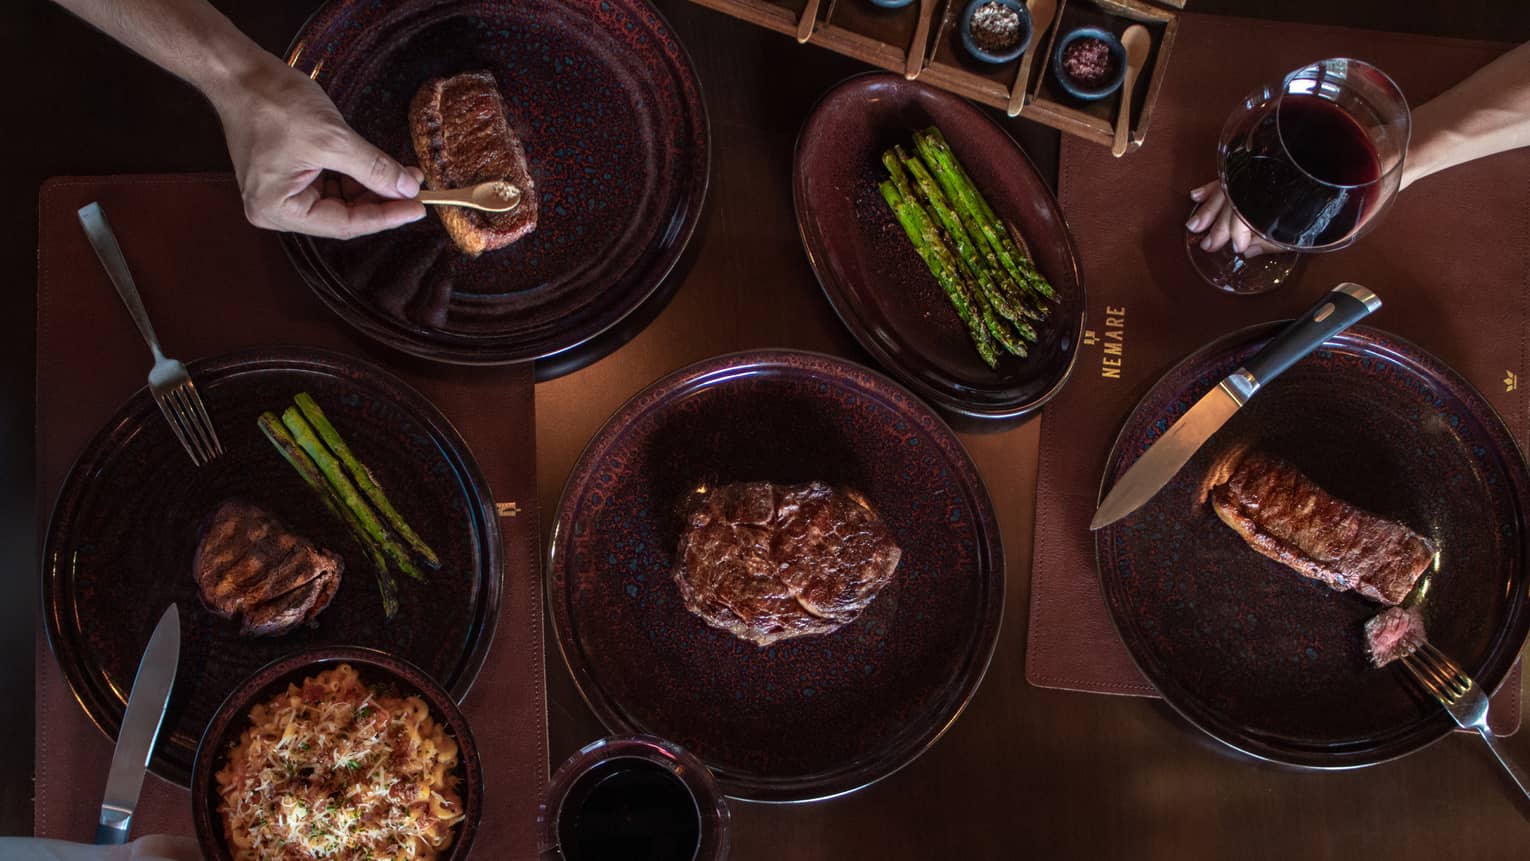 Overhead view of six dark-red stoneware dishes on a wooden table, four each plated with different cuts of steak, one with asparagus and another with a past-type food being passed by a hand